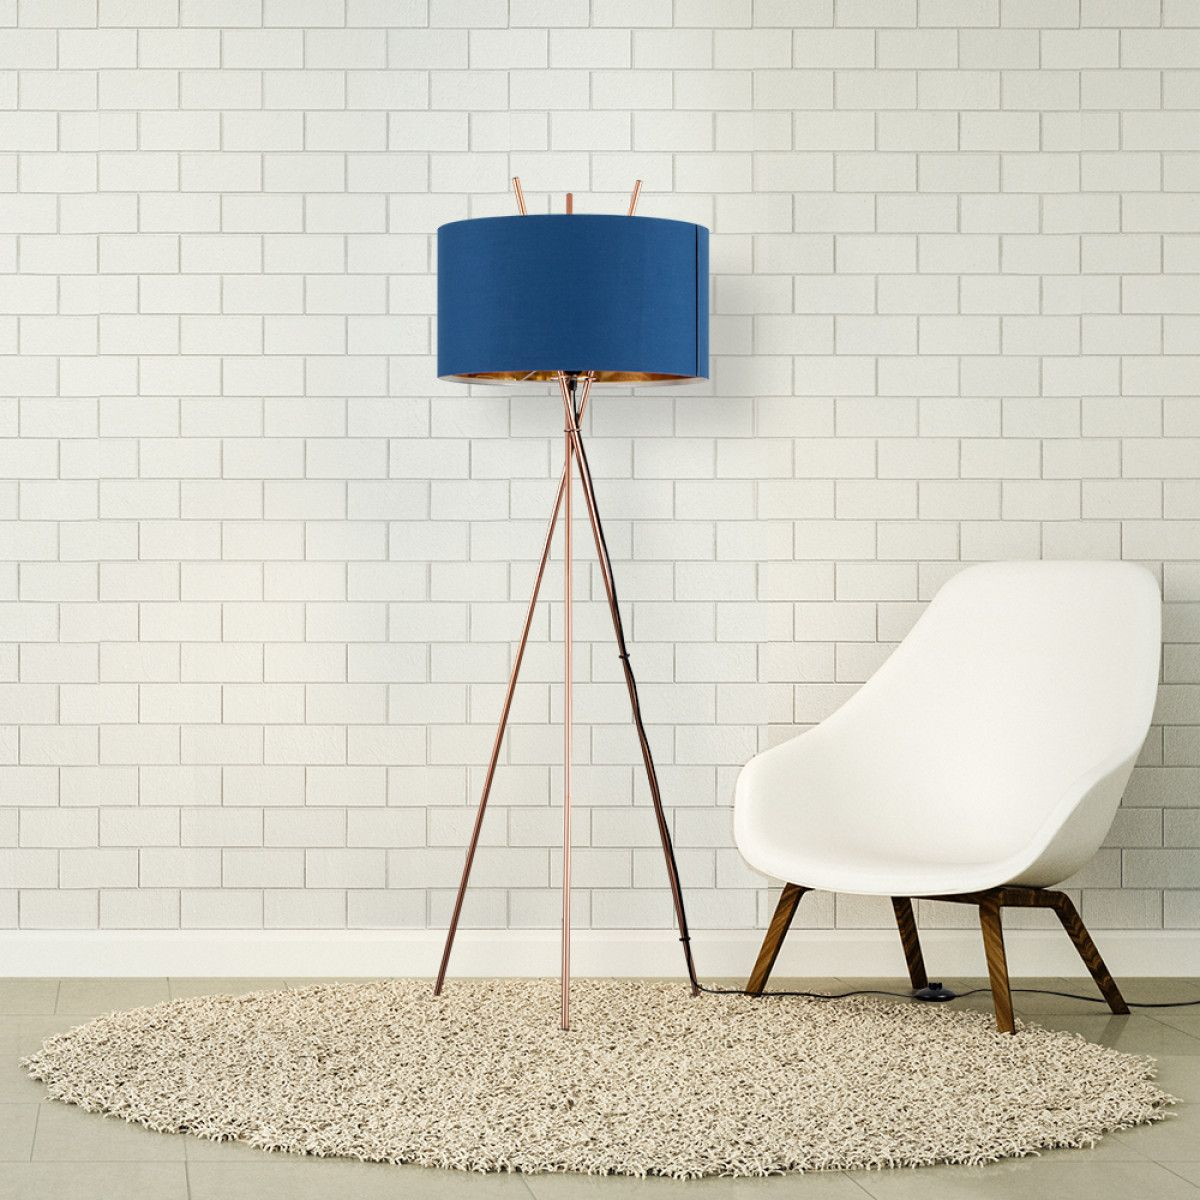 Crawford Tripod Floor Lamp Copper With Navy Blue Shade intended for dimensions 1200 X 1200